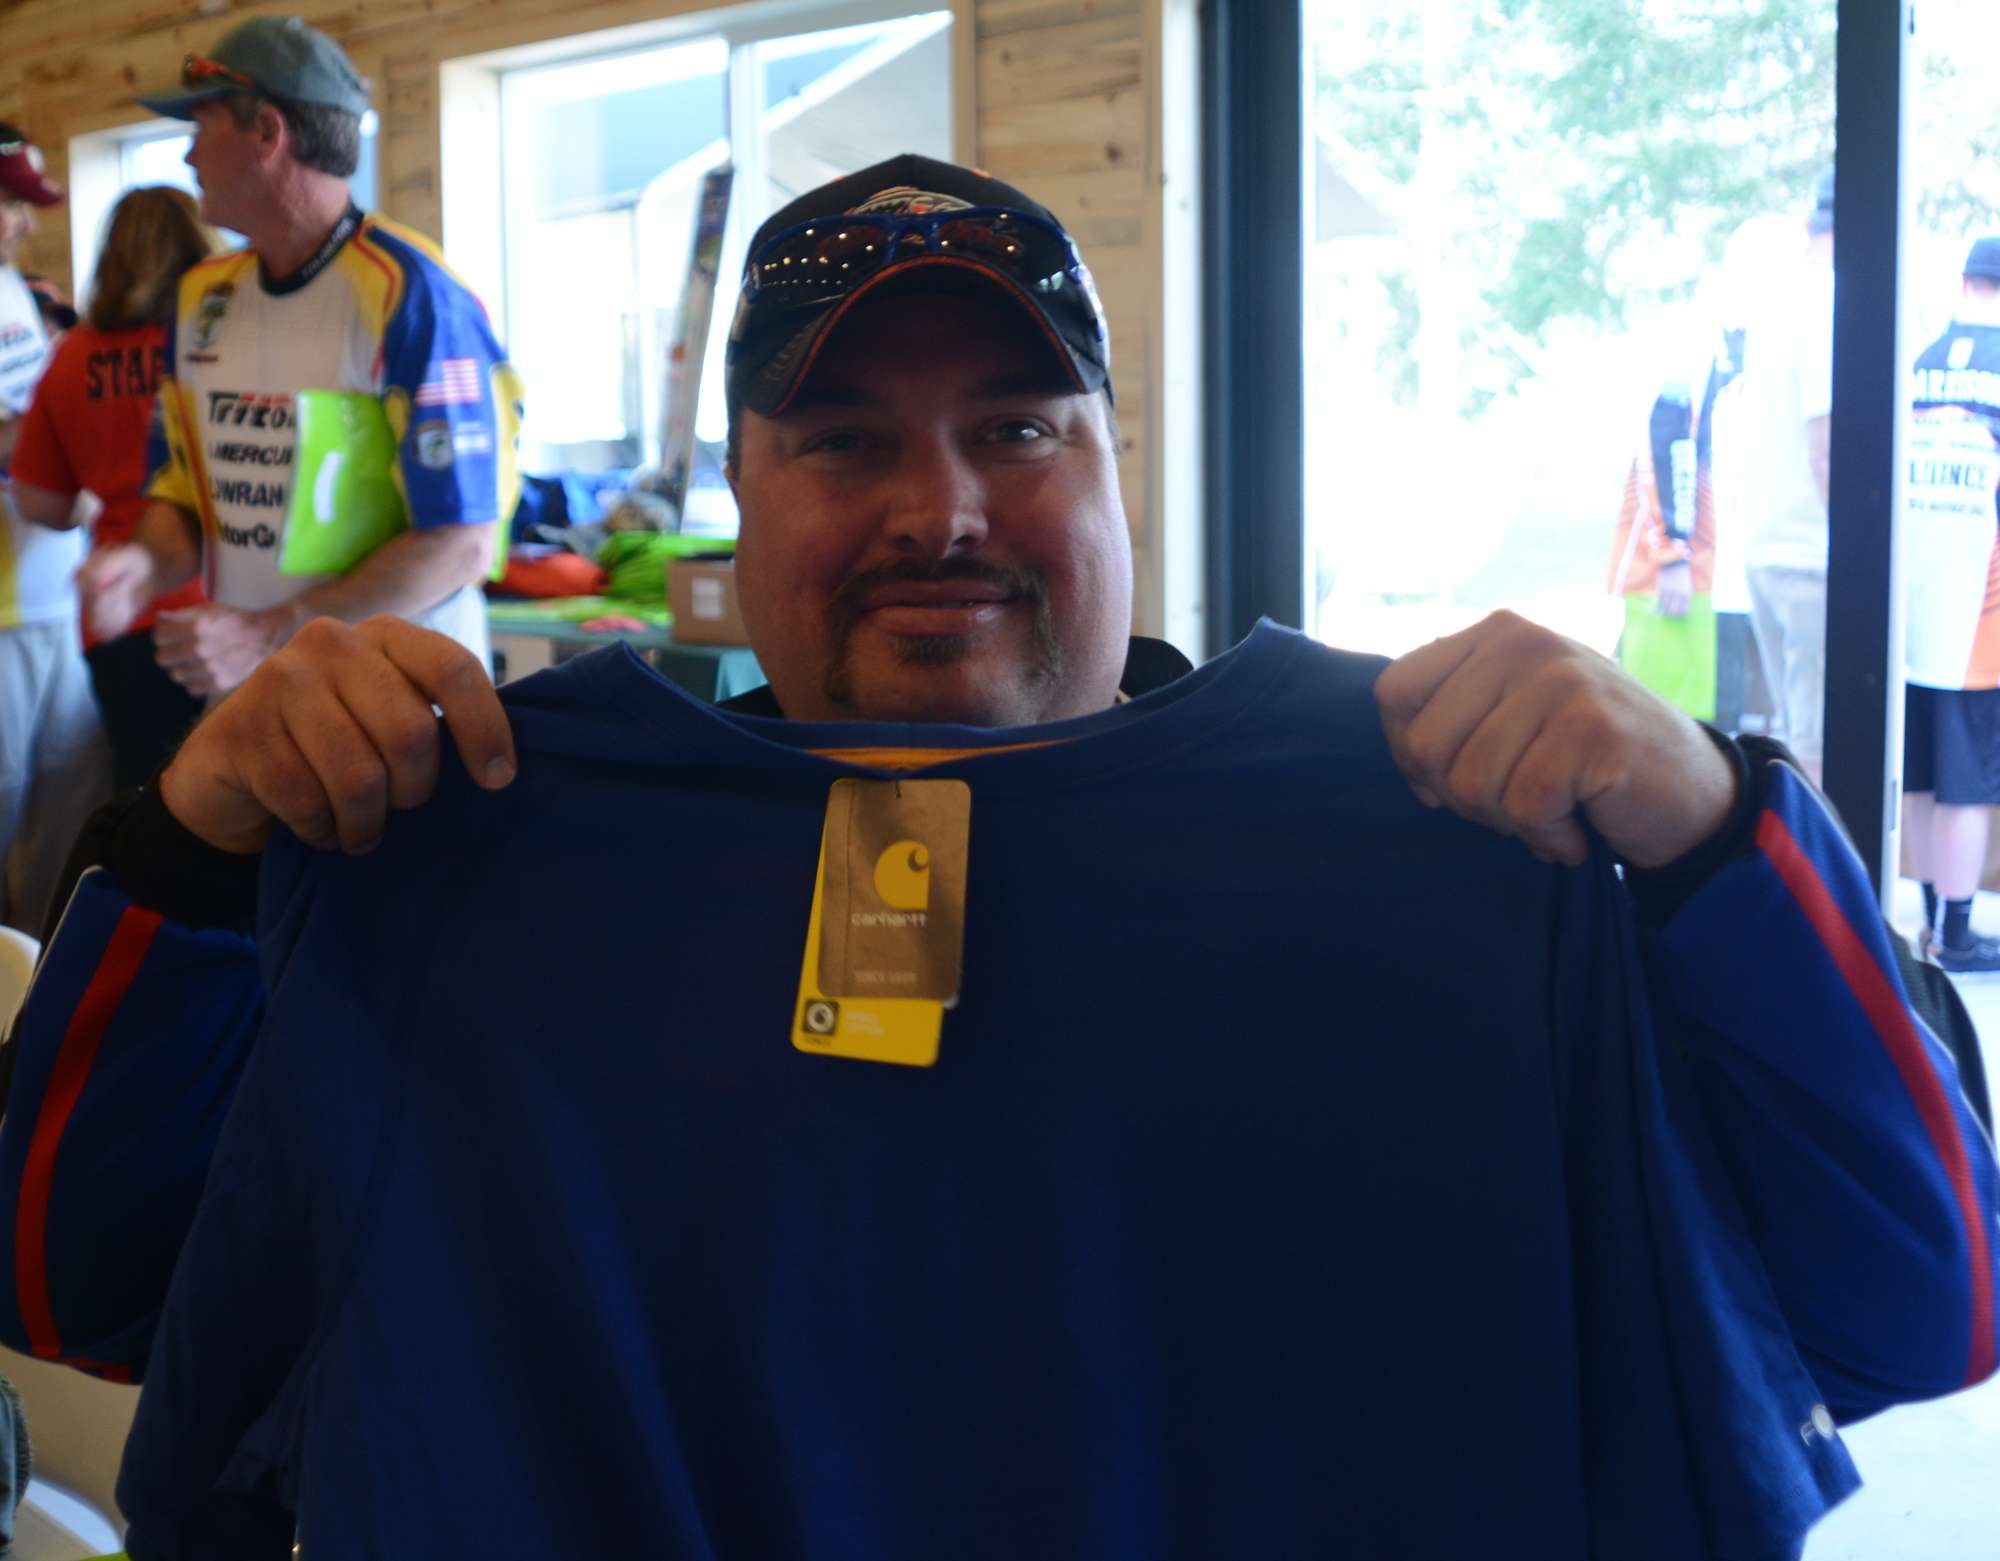 Chris Felty of the Idaho B.A.S.S. Nation displays one of his new Carhartt shirts.